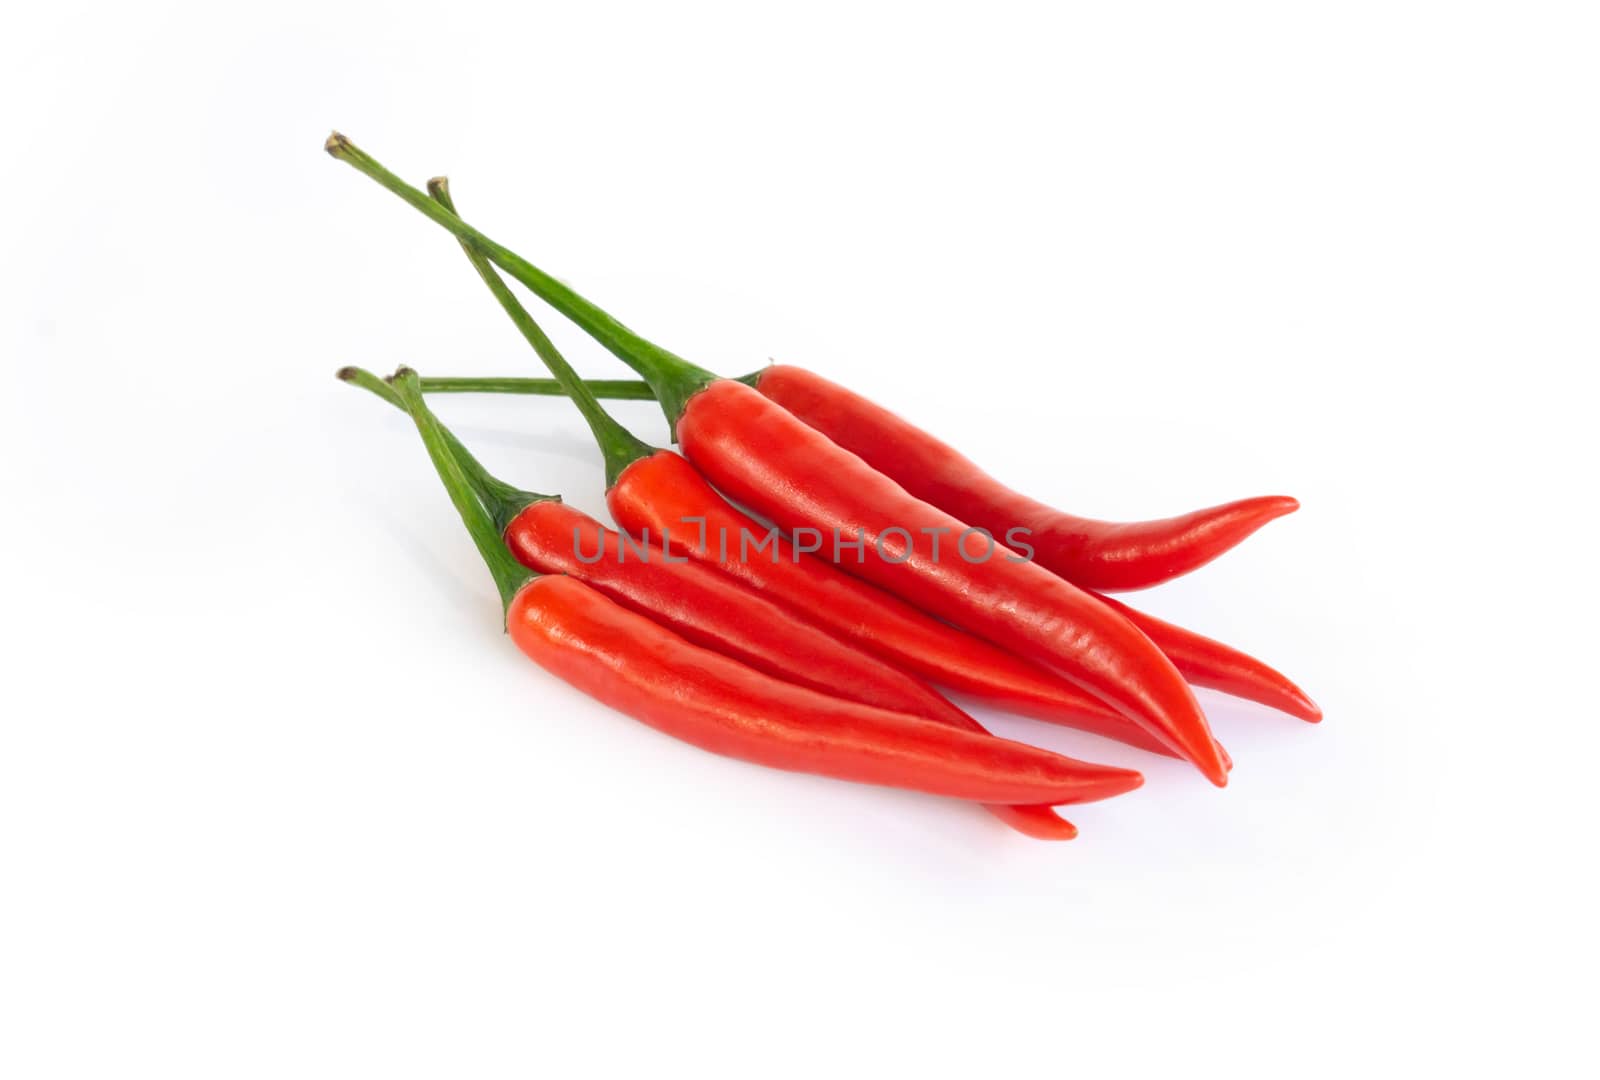 Closeup chilli pepper on white background, raw food ingredient concept